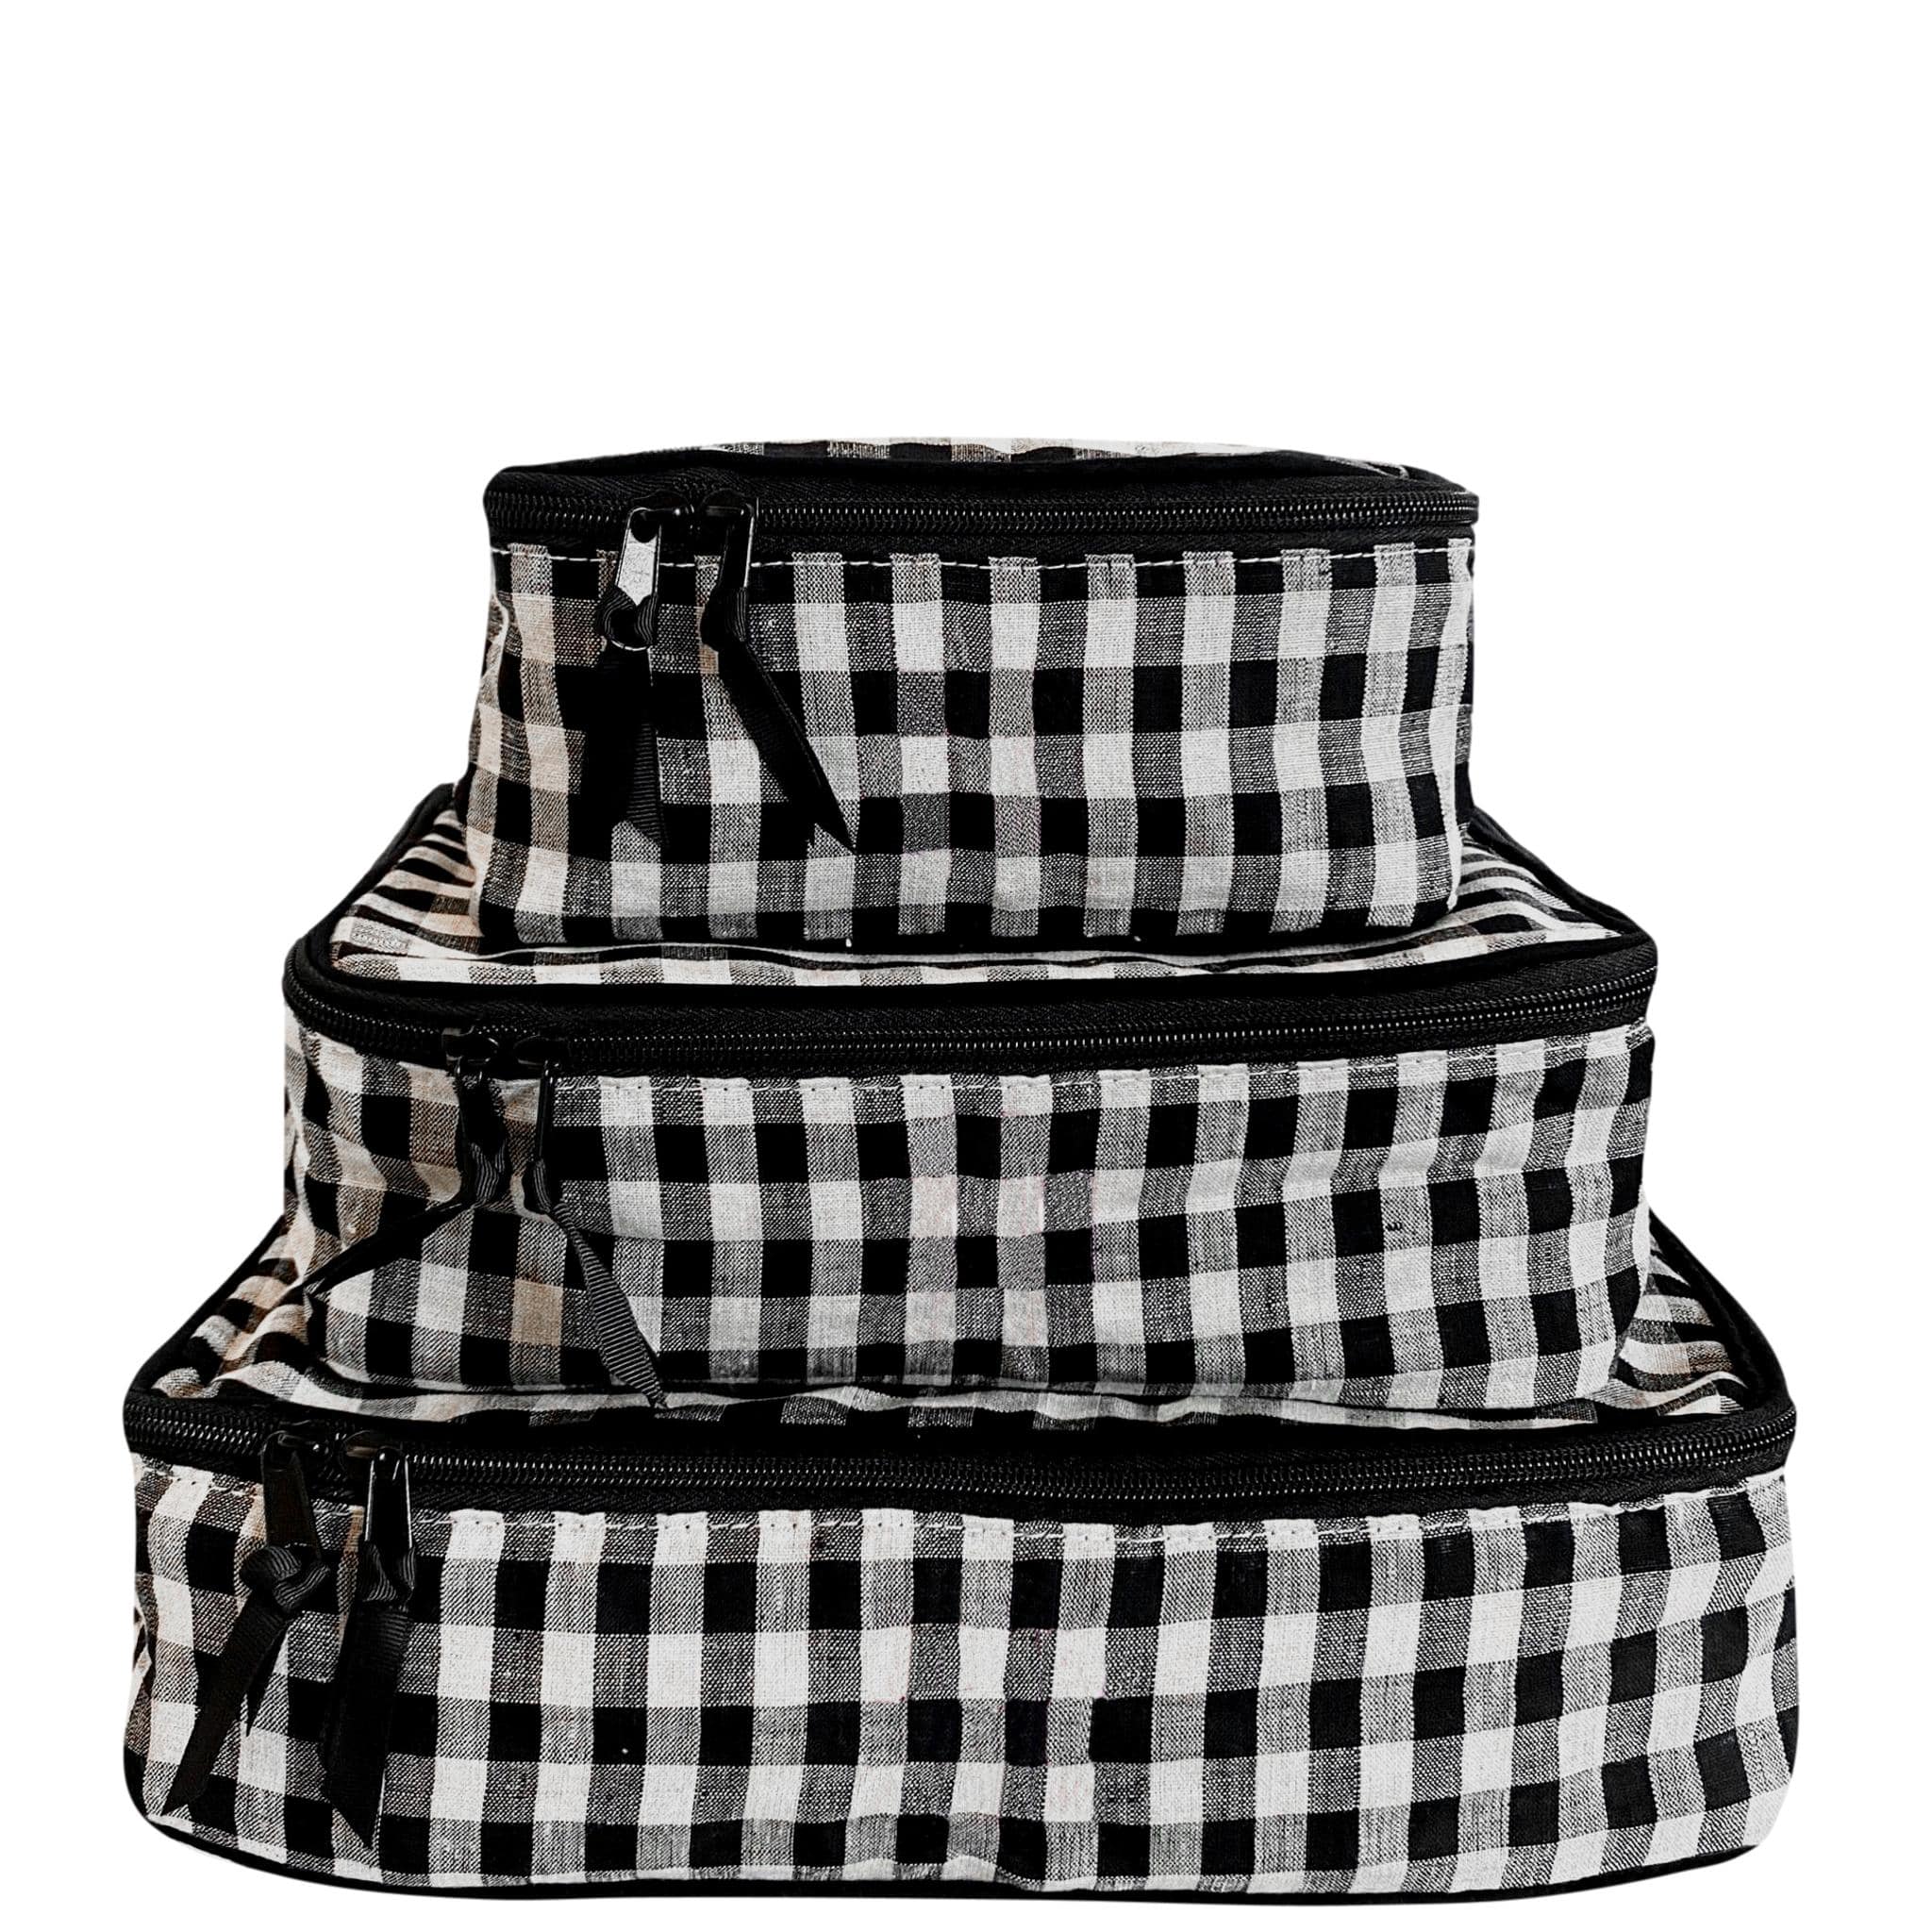 Linen Packing cubes - Gingham ( In Stock )